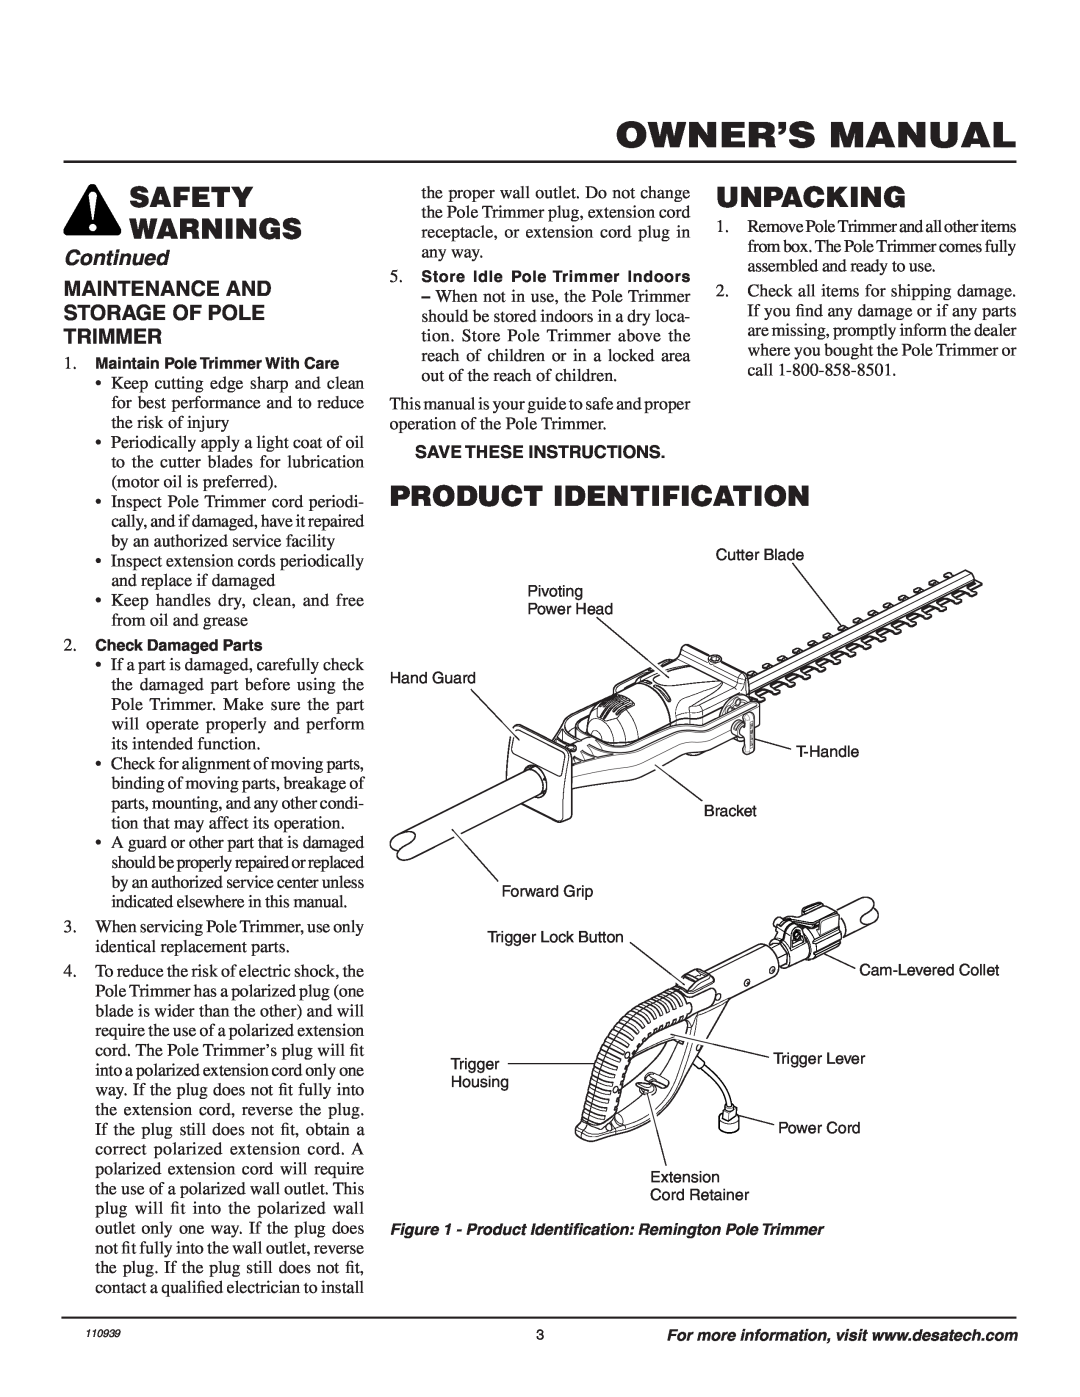 Remington Power Tools 117535-01A owner manual Owner’S Manual, Unpacking, Product Identification, Continued, Safety Warnings 